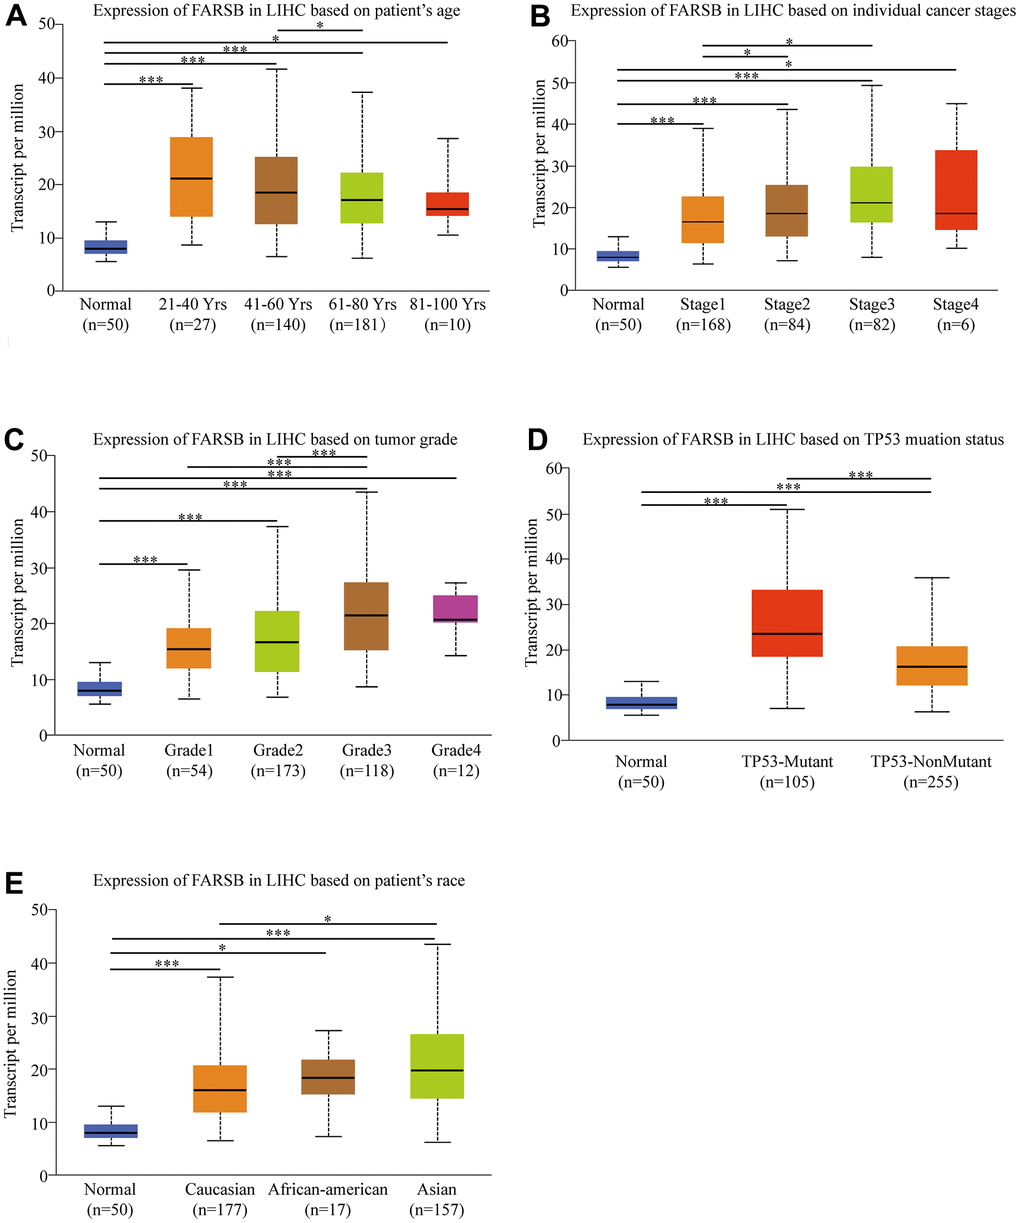 Box-plots exploring the relationship between FARSB expression and clinicopathological characteristics (UALCAN). Increased FARSB expression was significantly with (A) age, (B) cancer stage, (C) tumor grade, (D) TP53 muation, (E) patient race. *P P P 